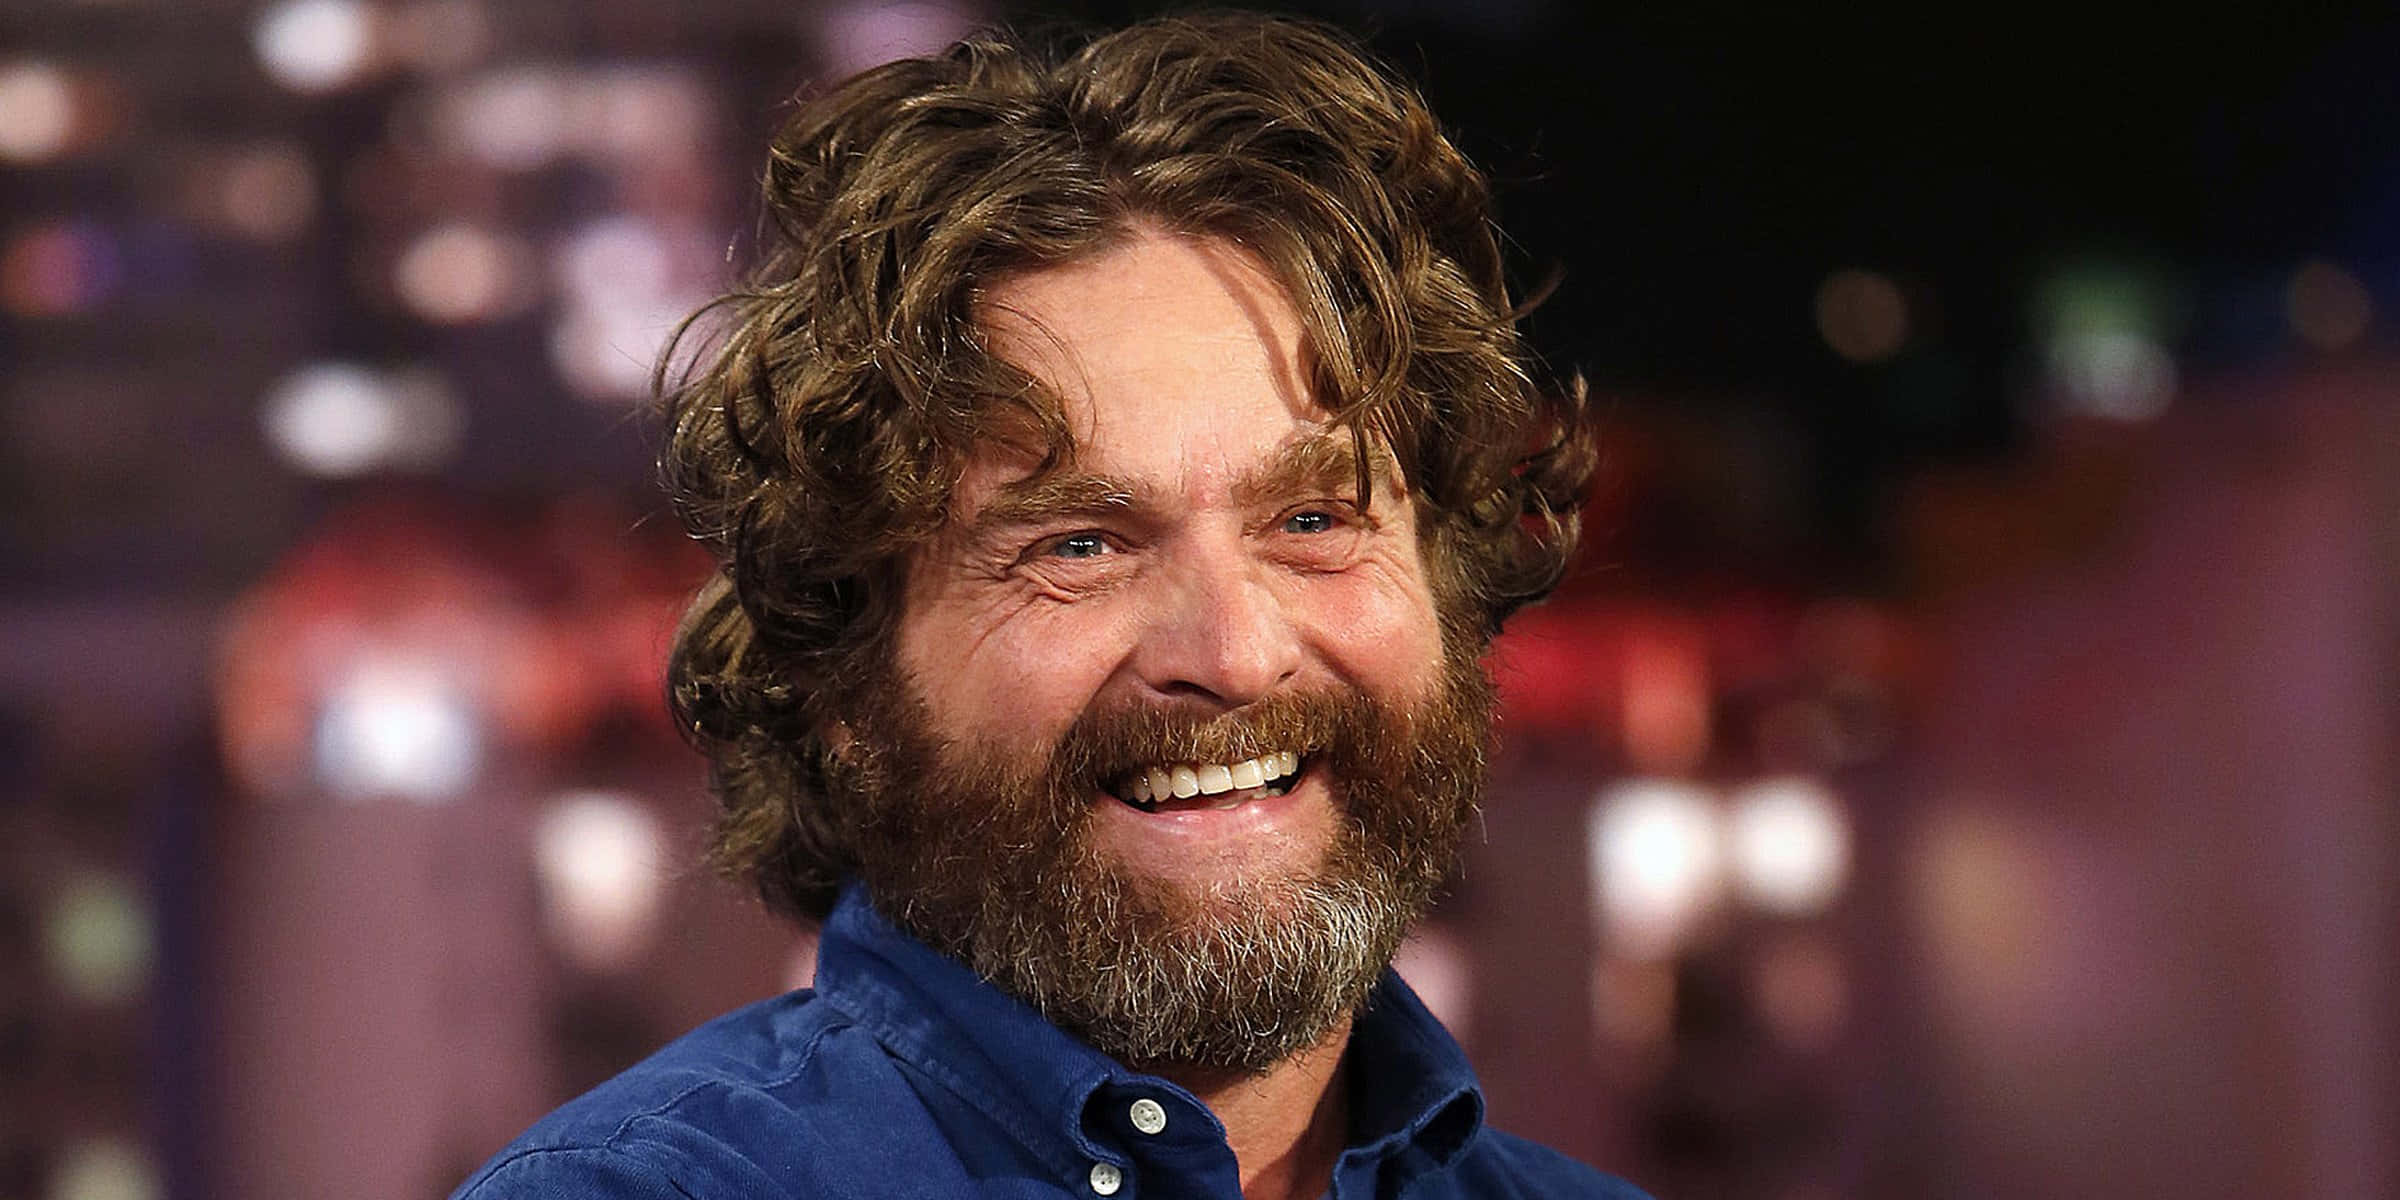 Comedian Zach Galifianakis looking off into the future Wallpaper